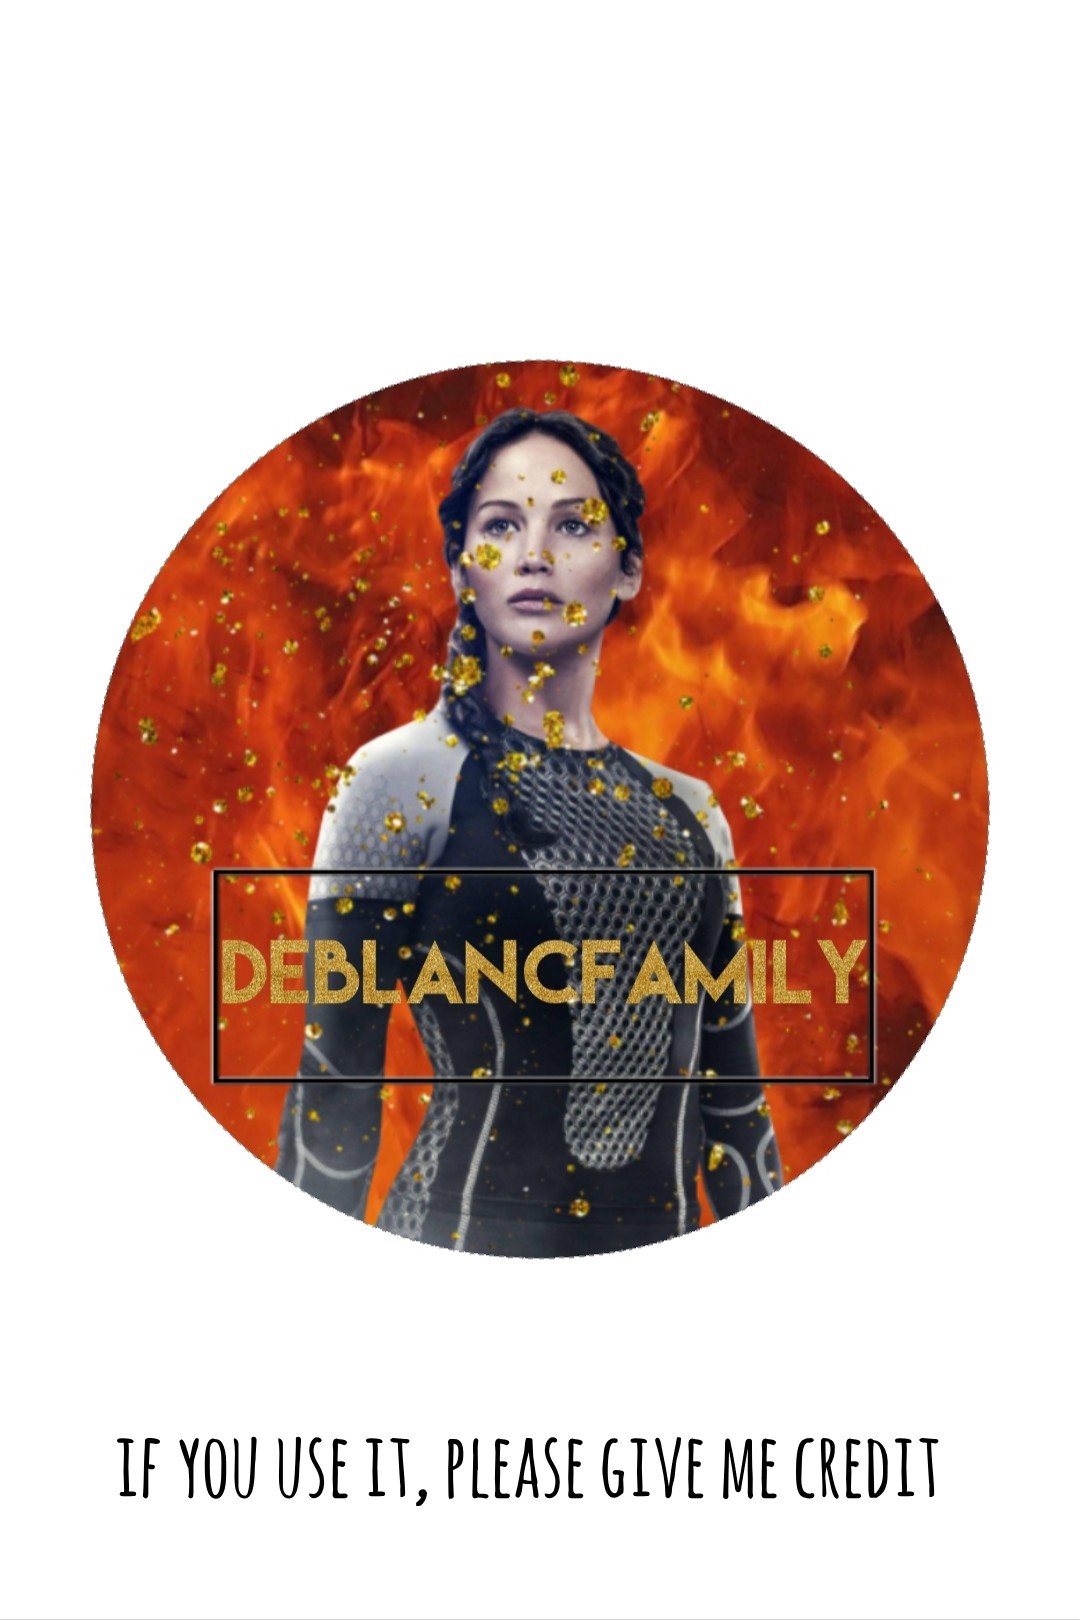 tap
icon for deblancfamily! hope you like it! love you guys and im trying to get the rest of the icons done!!!❤